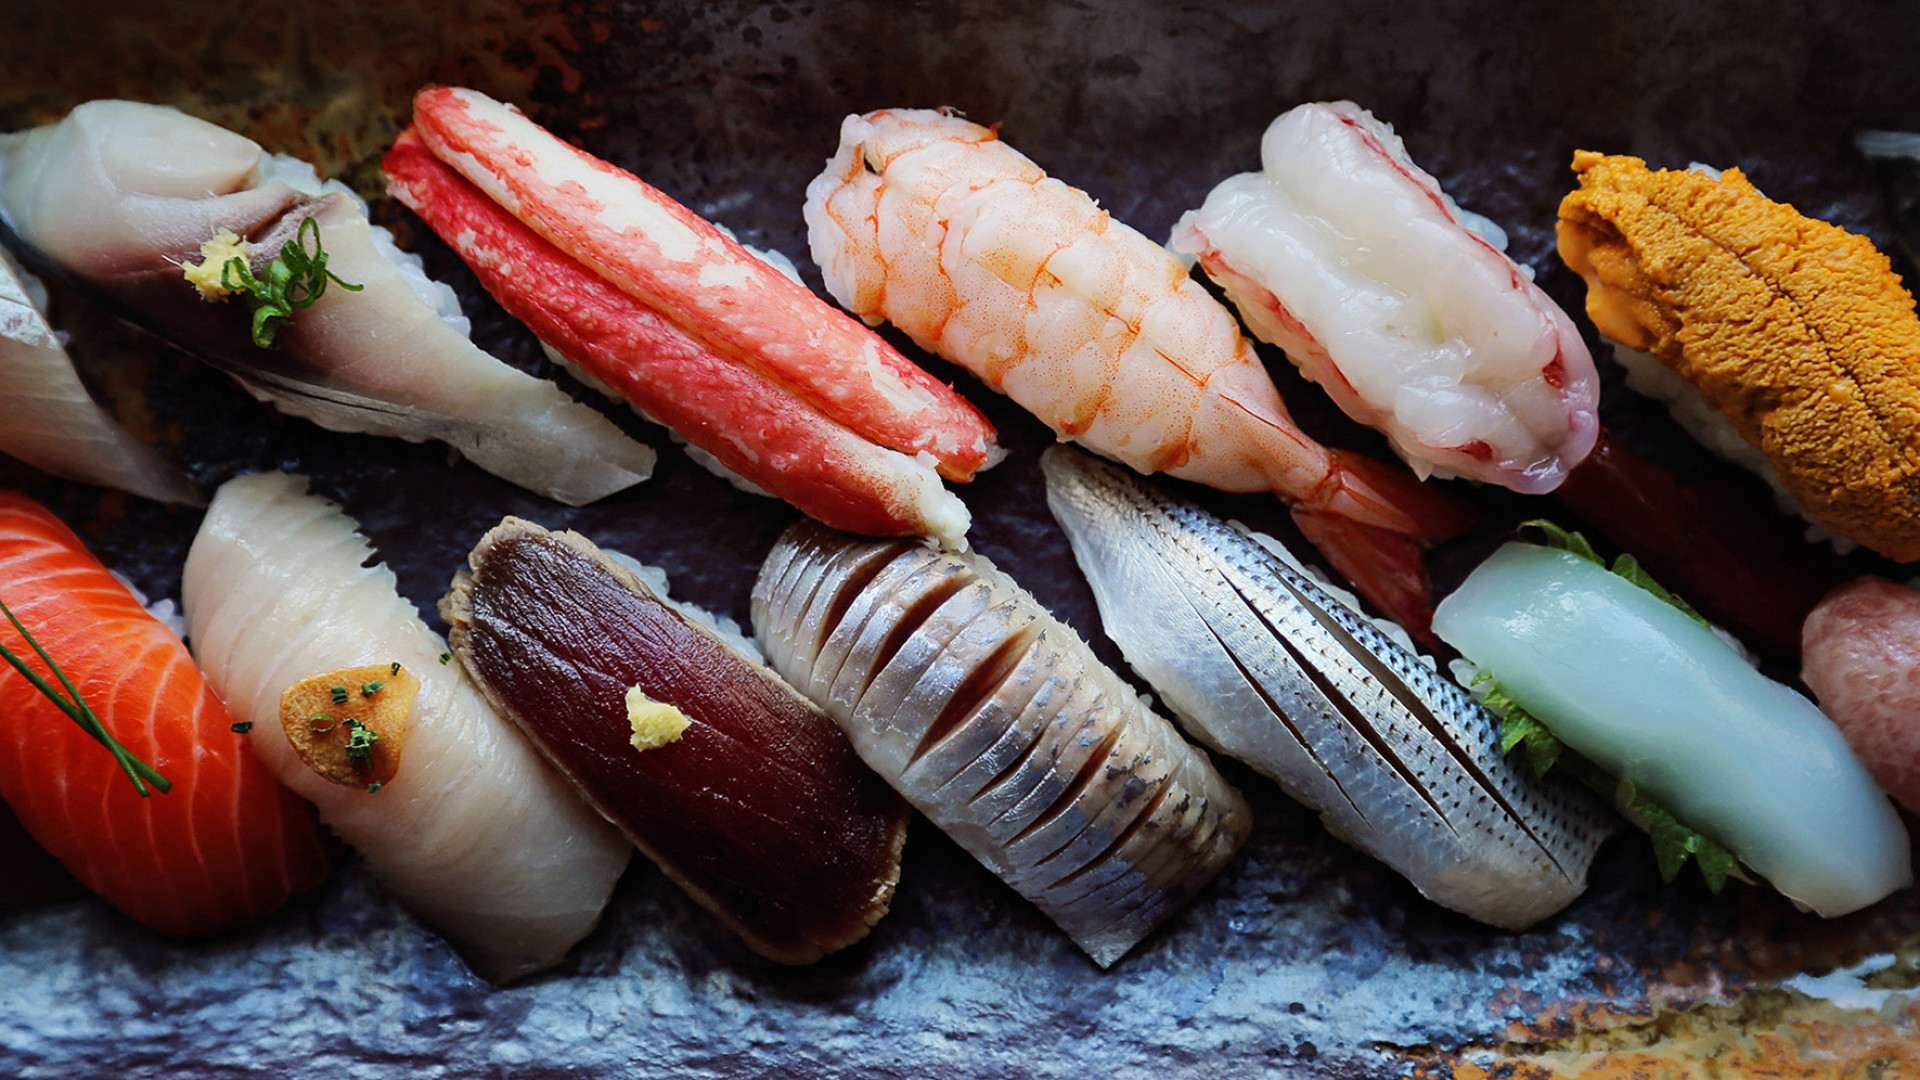 Manggha Jasieński's fulfilled dream. Want to know what the difference between sushi and sashimi is – best to pay a visit to the EDO SUSHI BAR.